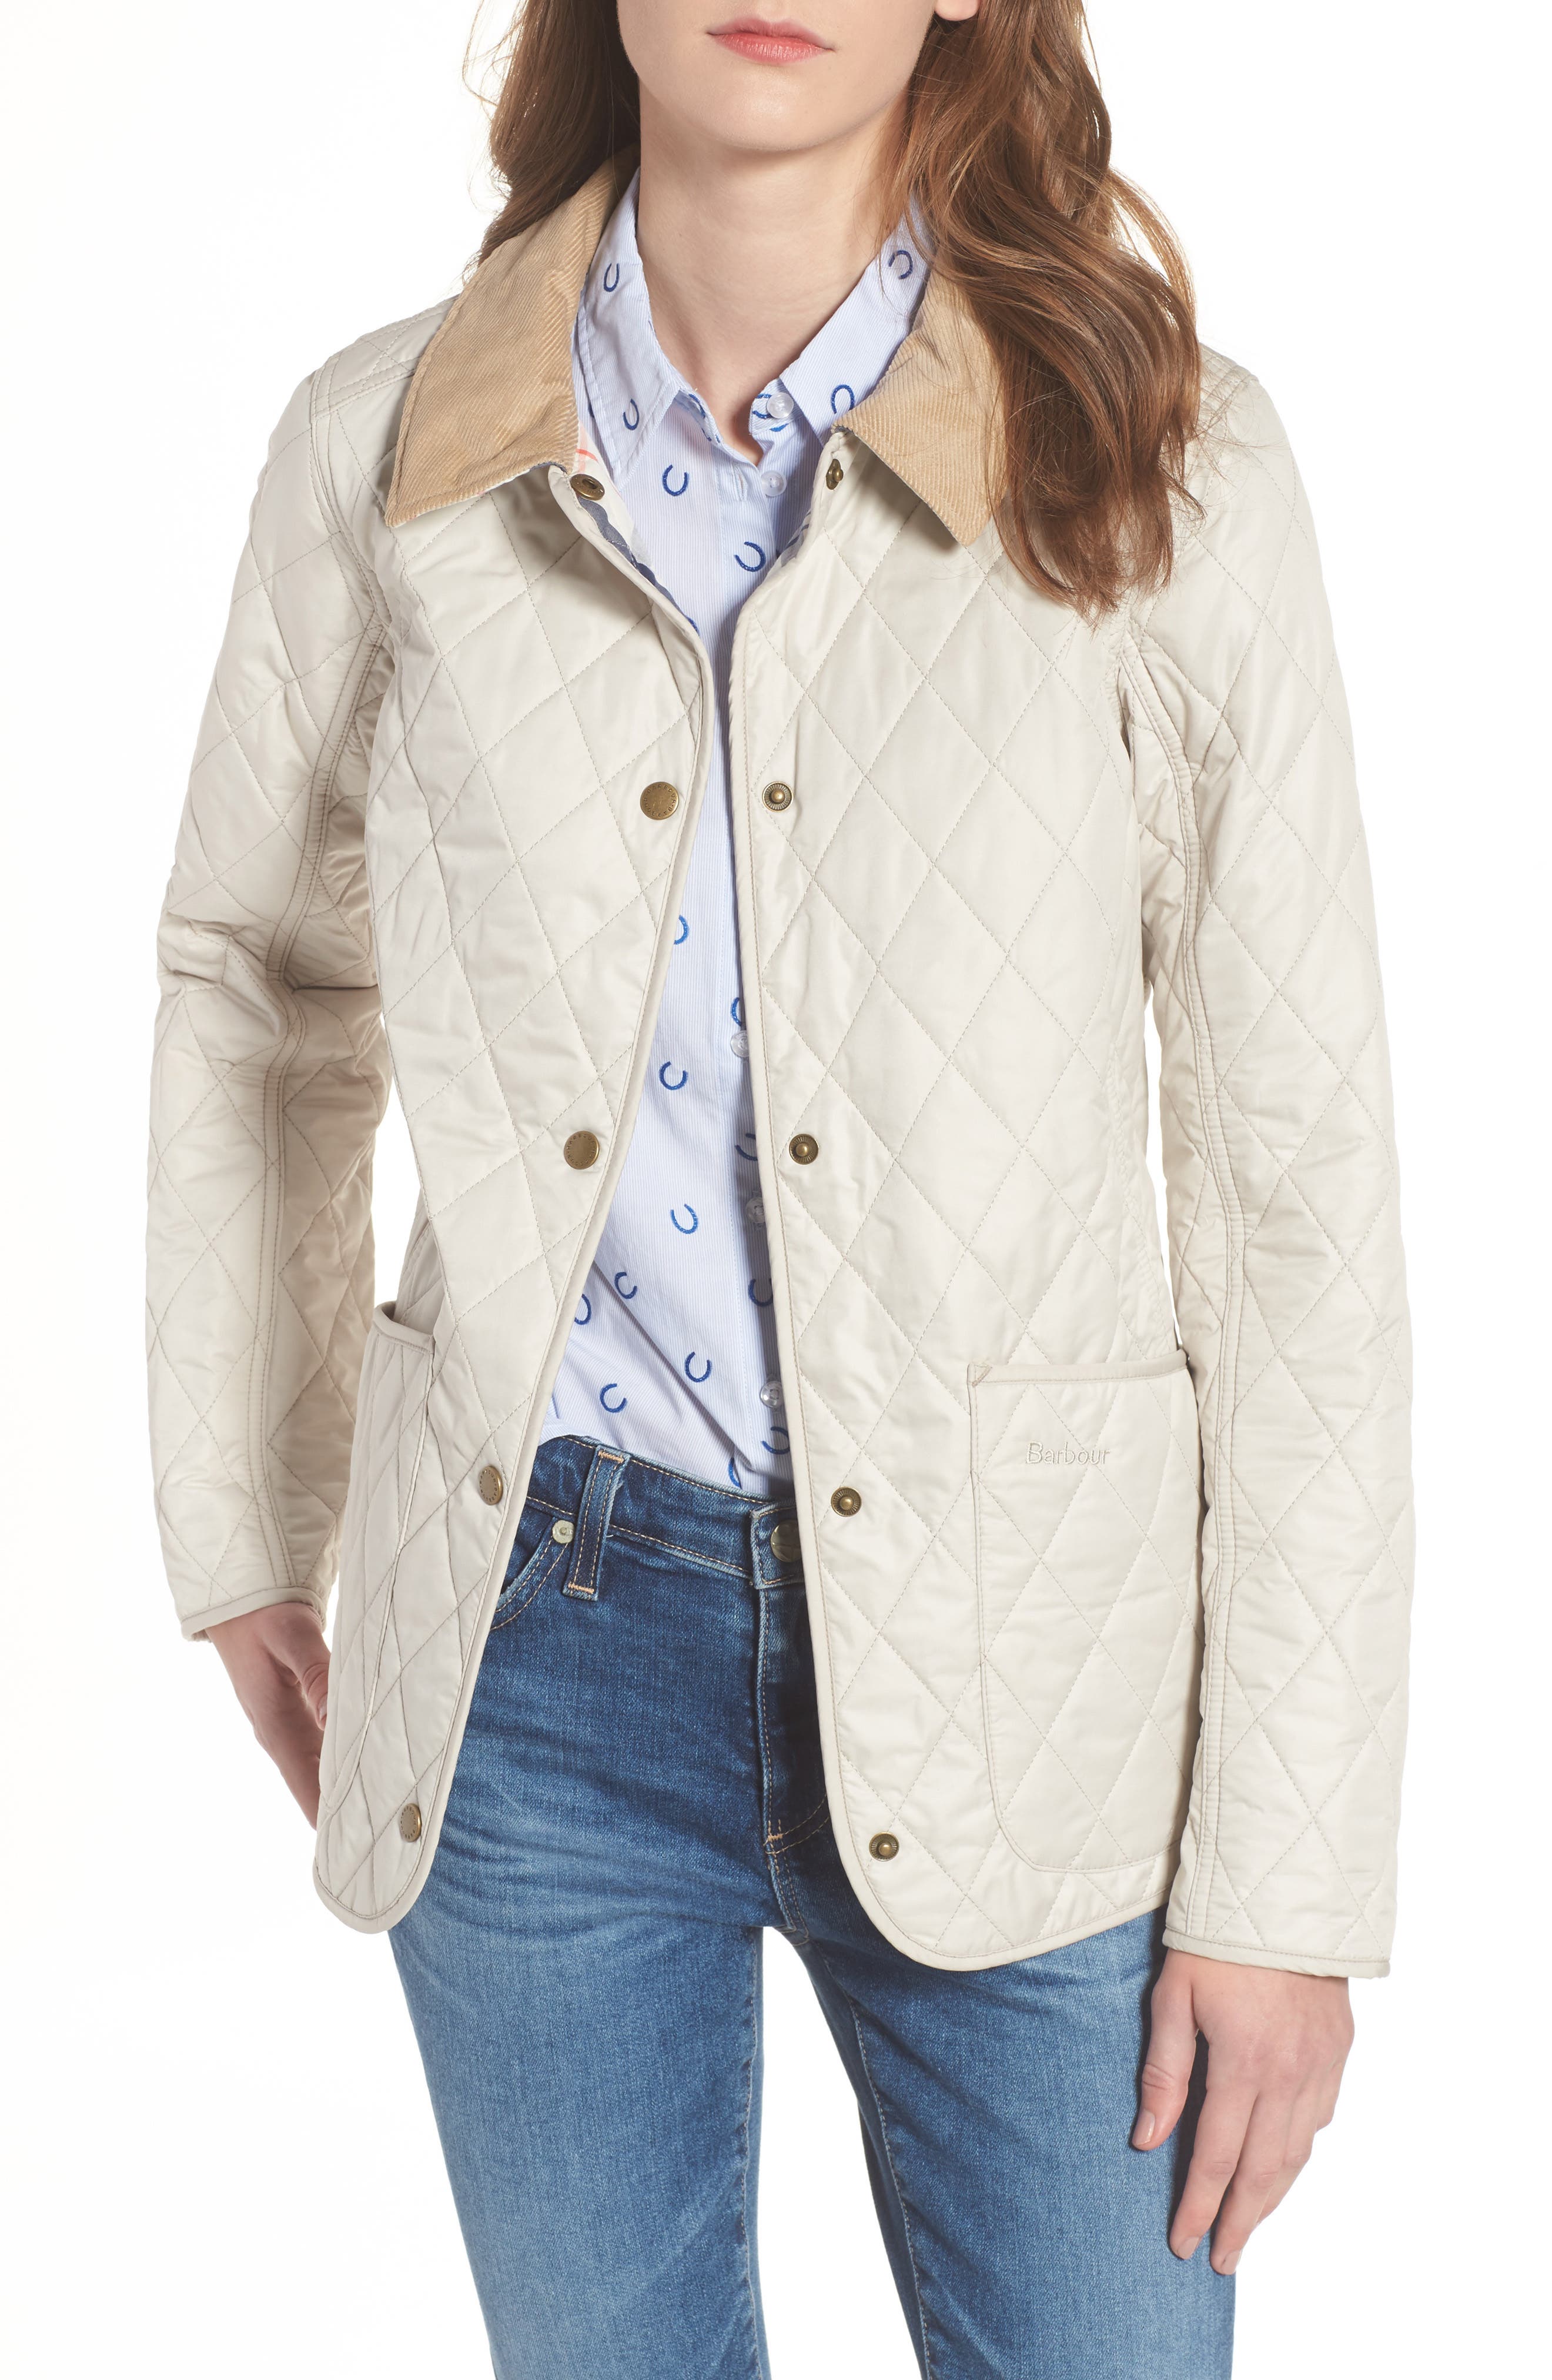 barbour womens jacket white